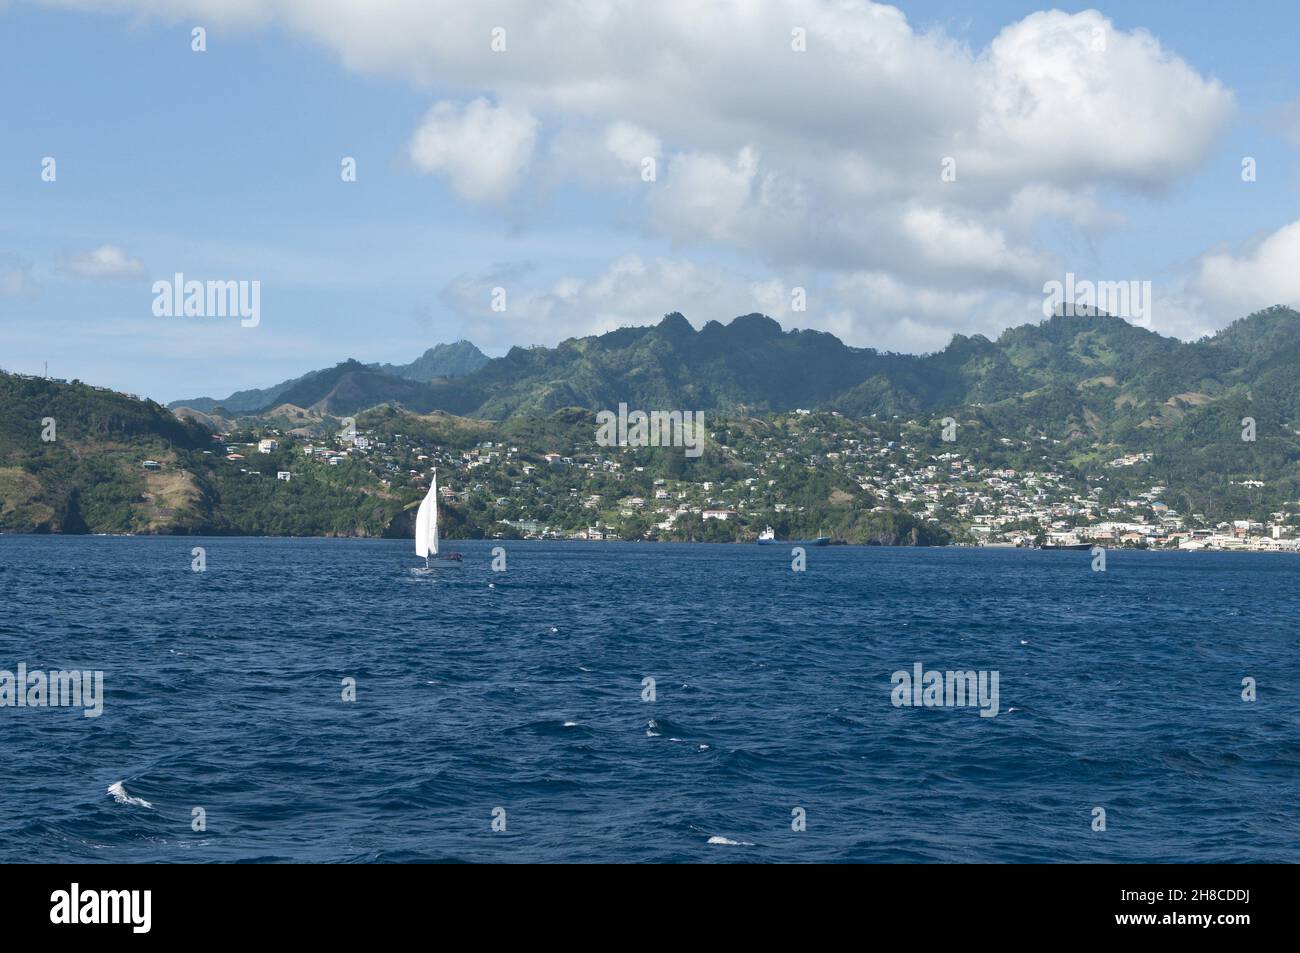 view of Kingstown Harbour from the sea, Saint Vincent and the Grenadines, Kingstown Stock Photo